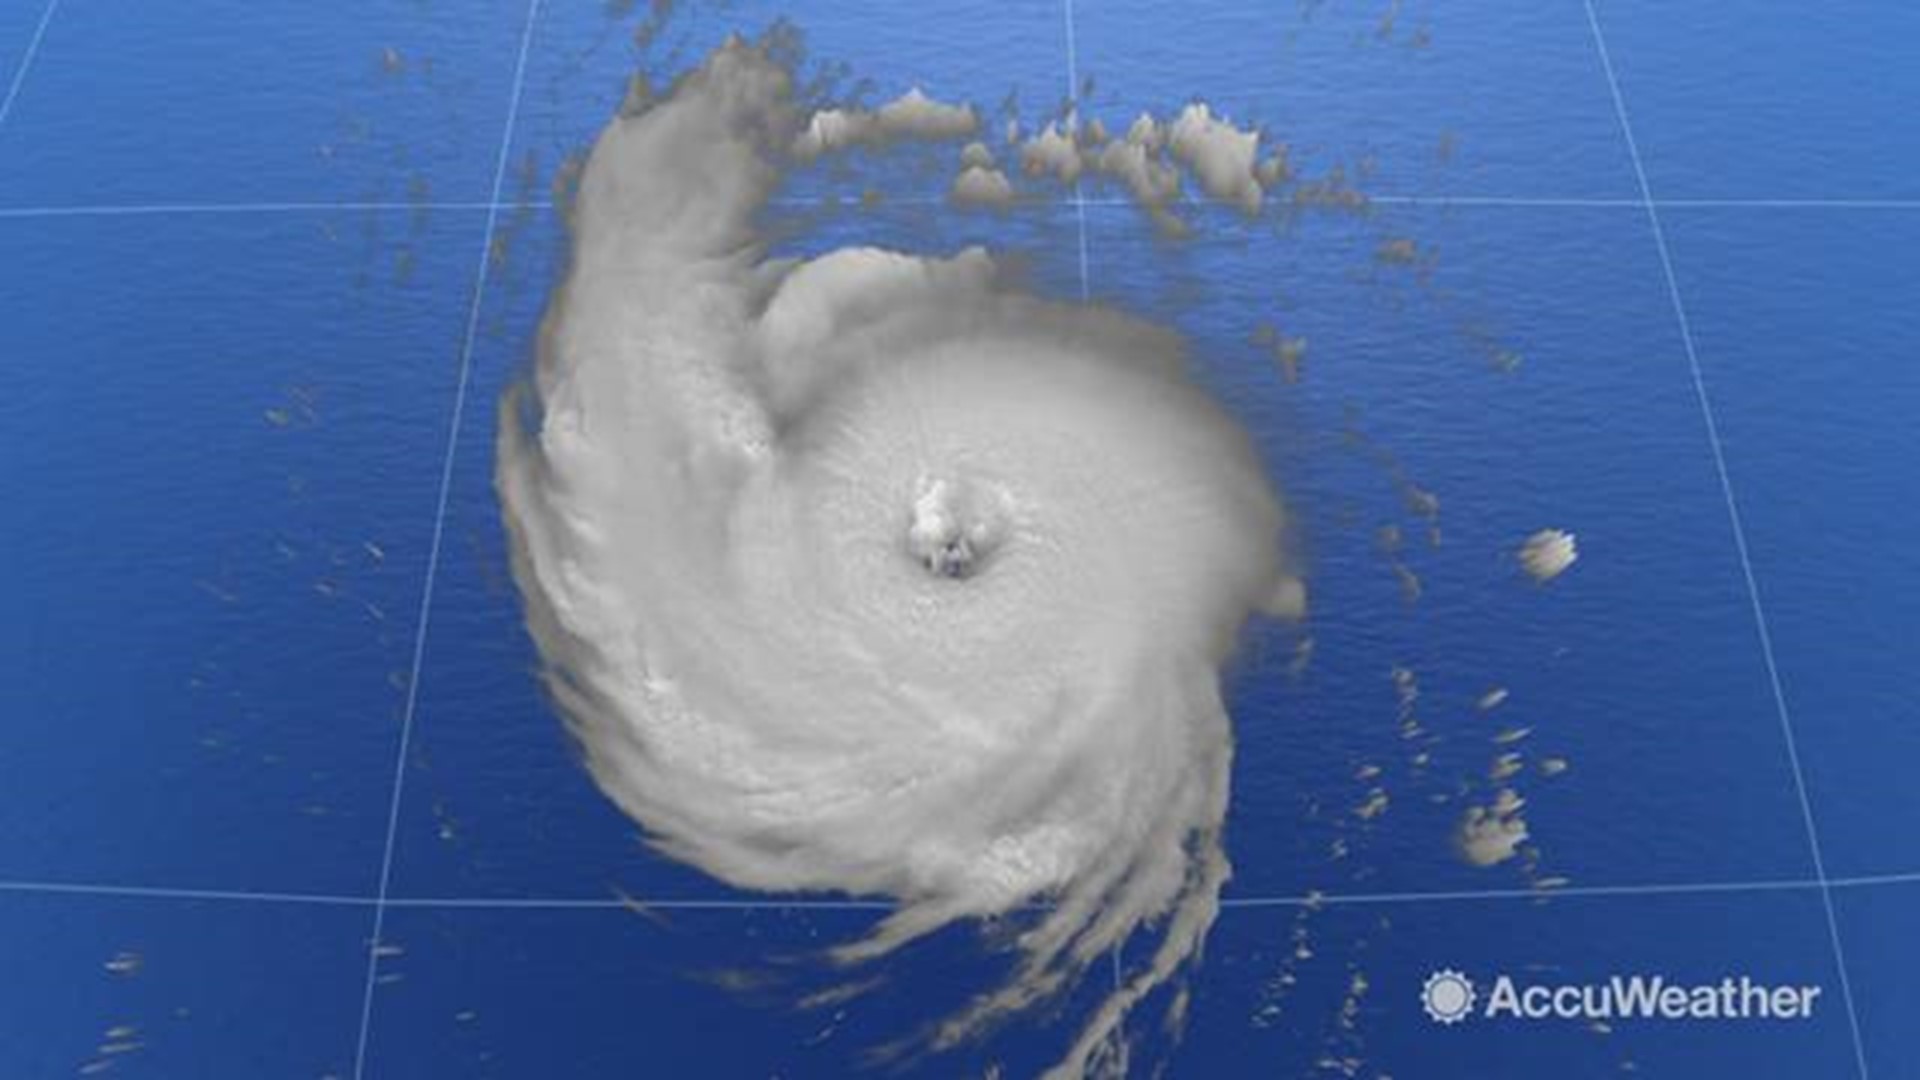 Category-4 Hurricane Florence continues to strengthen days ahead of landfall, as it approaches the US with life-threatening devastation.